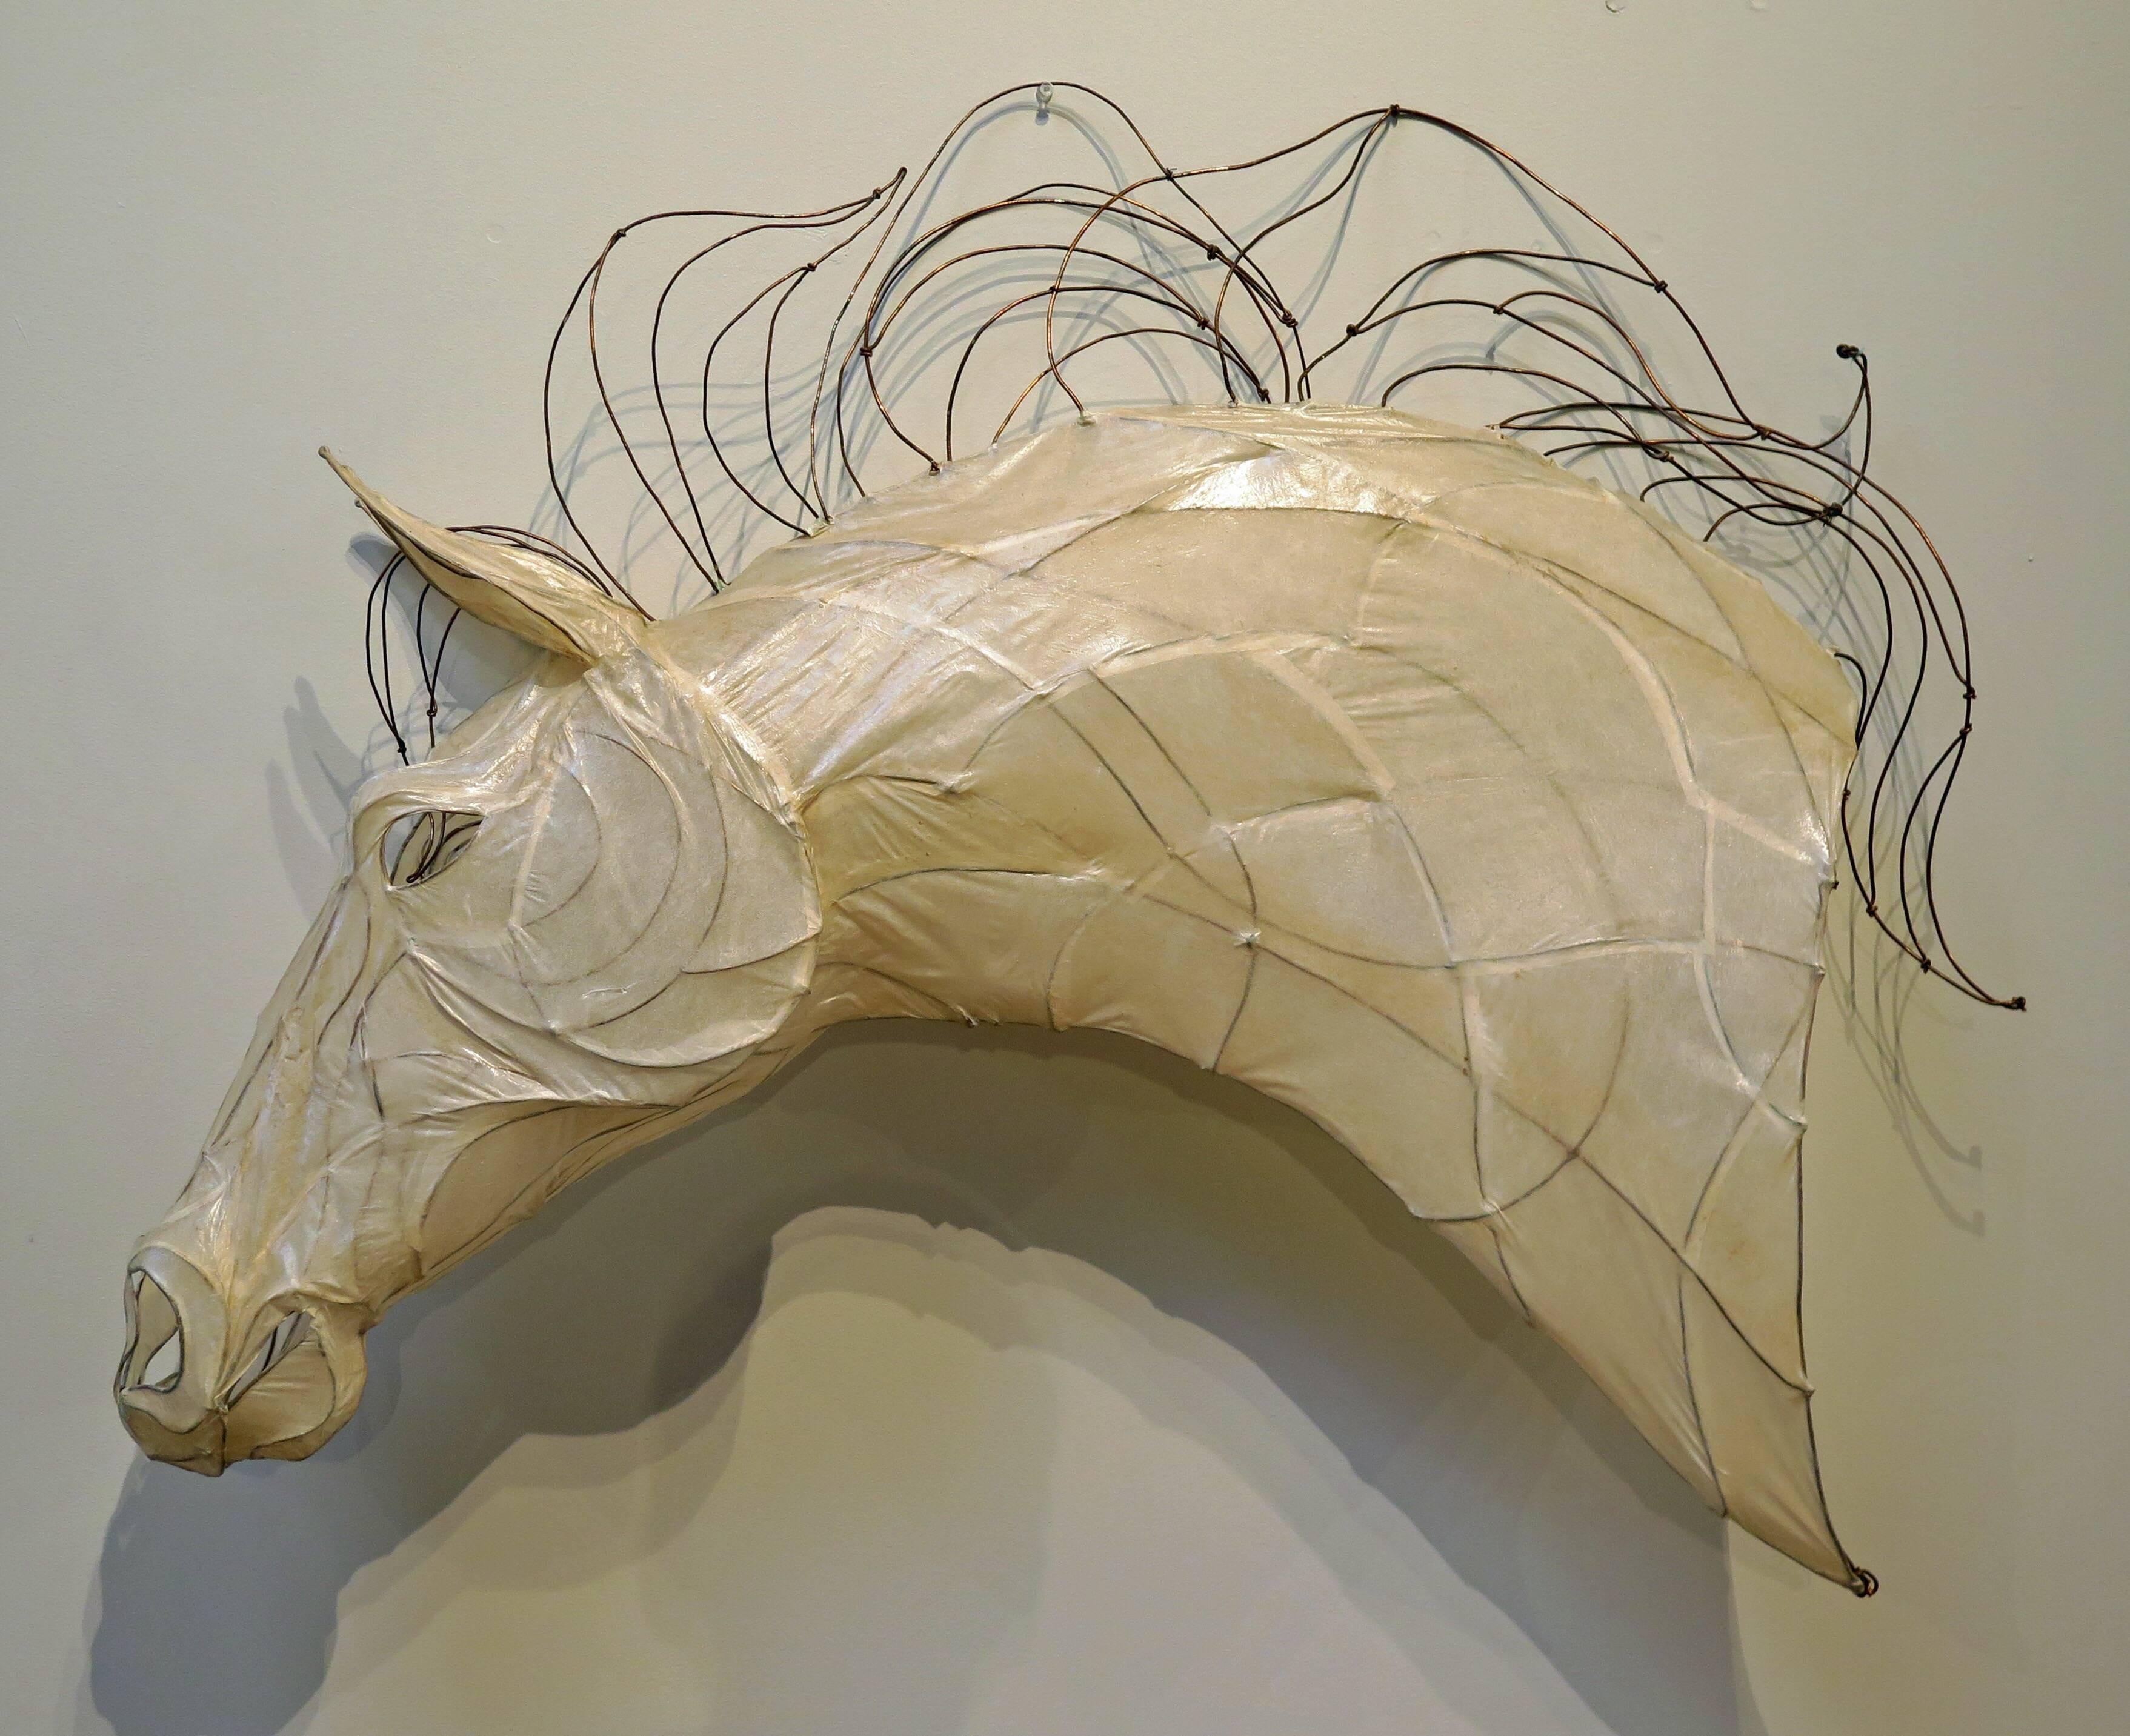 A stunning near life-sized sculpture of a horse head. Crafted from a translucent glazed white paper over a copper wire frame, the mane also of copper wire, bent and twisted, as if being blown by the wind.
Reminiscent of Inuit seal gut parkas and